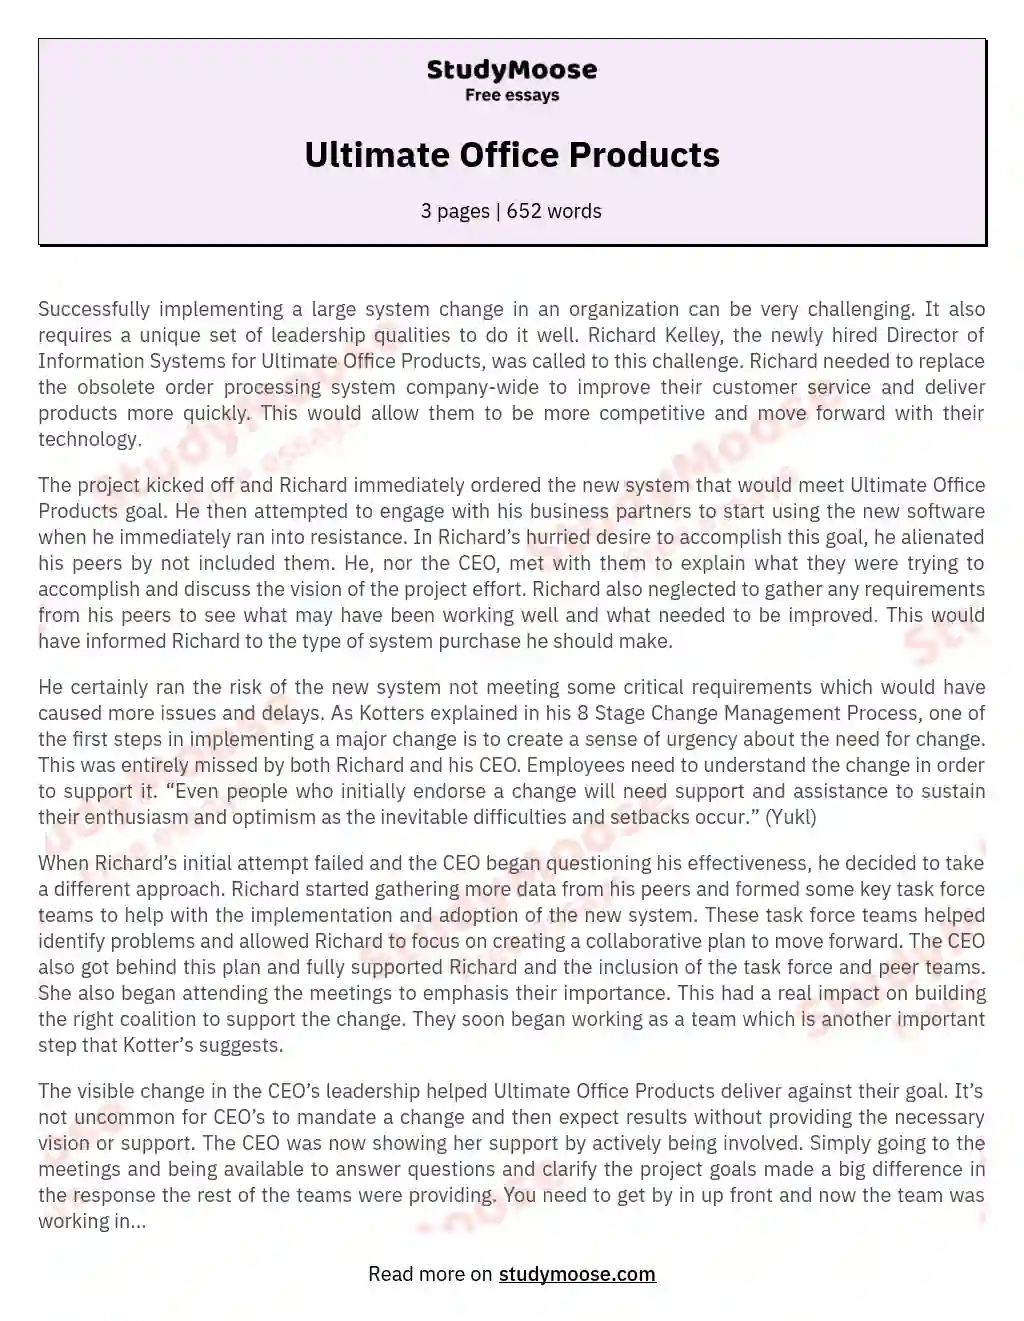 Ultimate Office Products essay